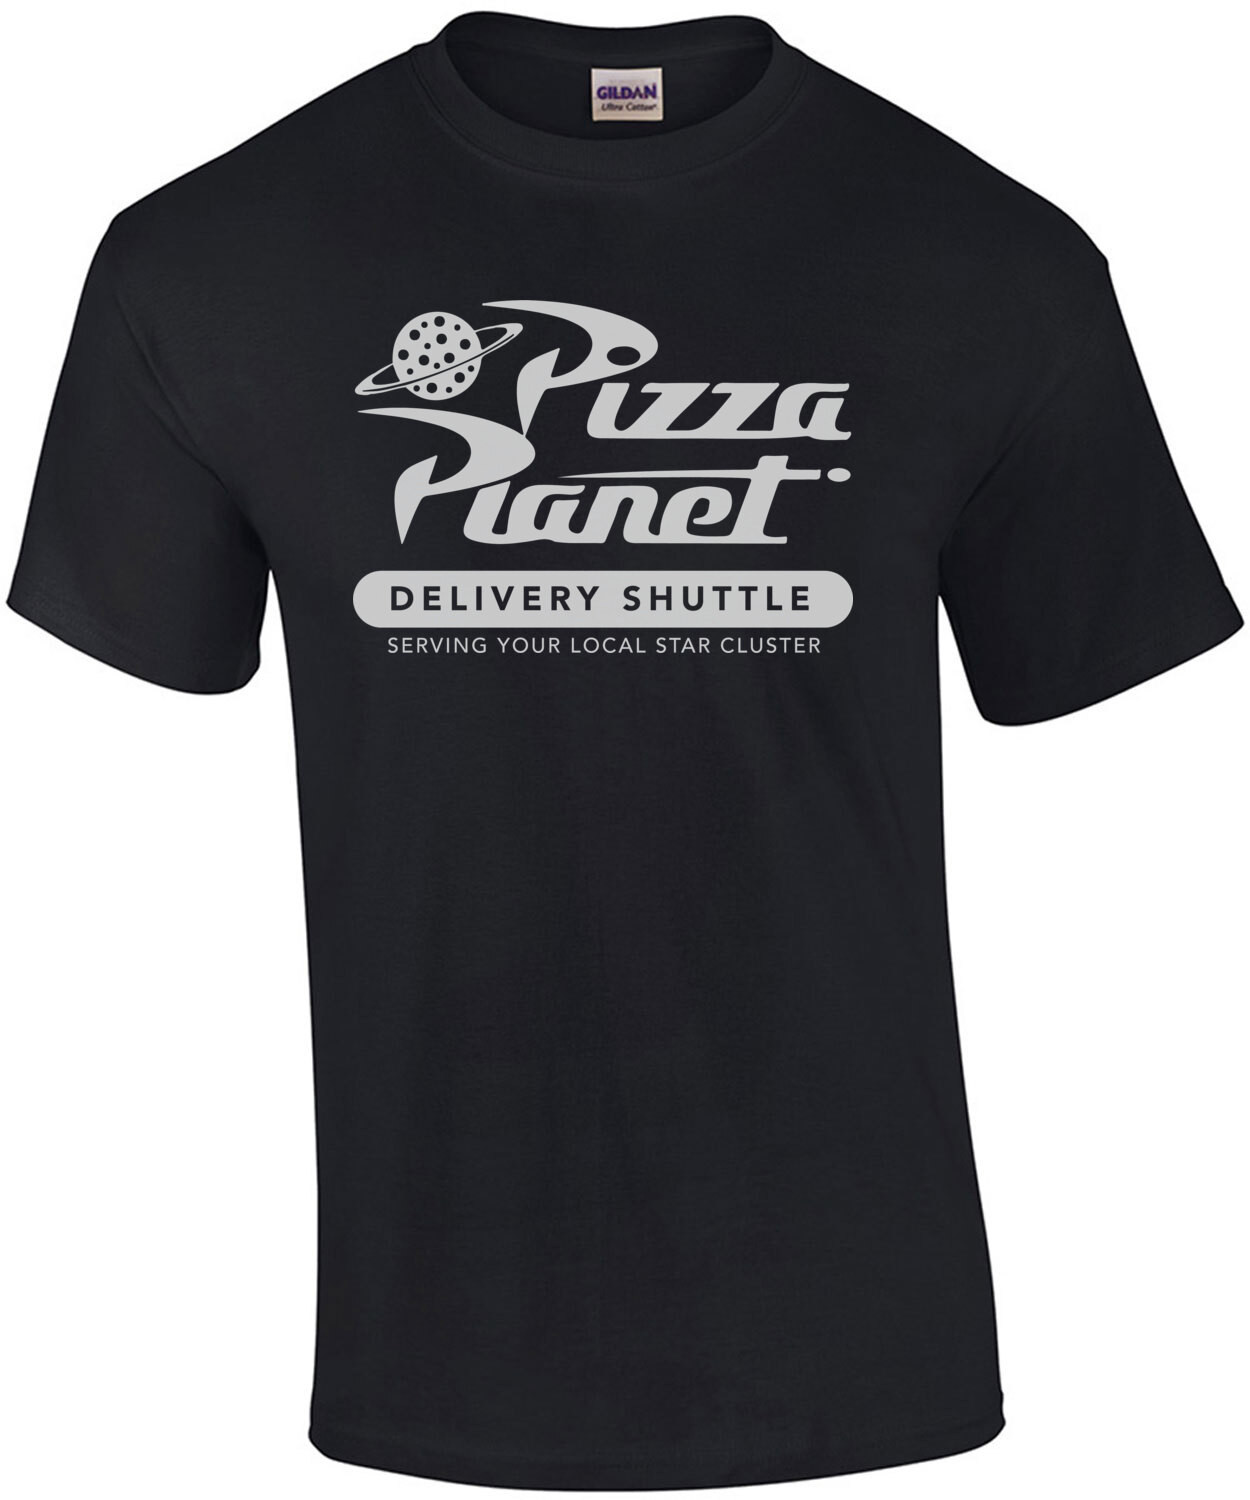 Pizza Planet Delivery Shuttle - Serving your local star cluster - Toy Story - 90's T-Shirt